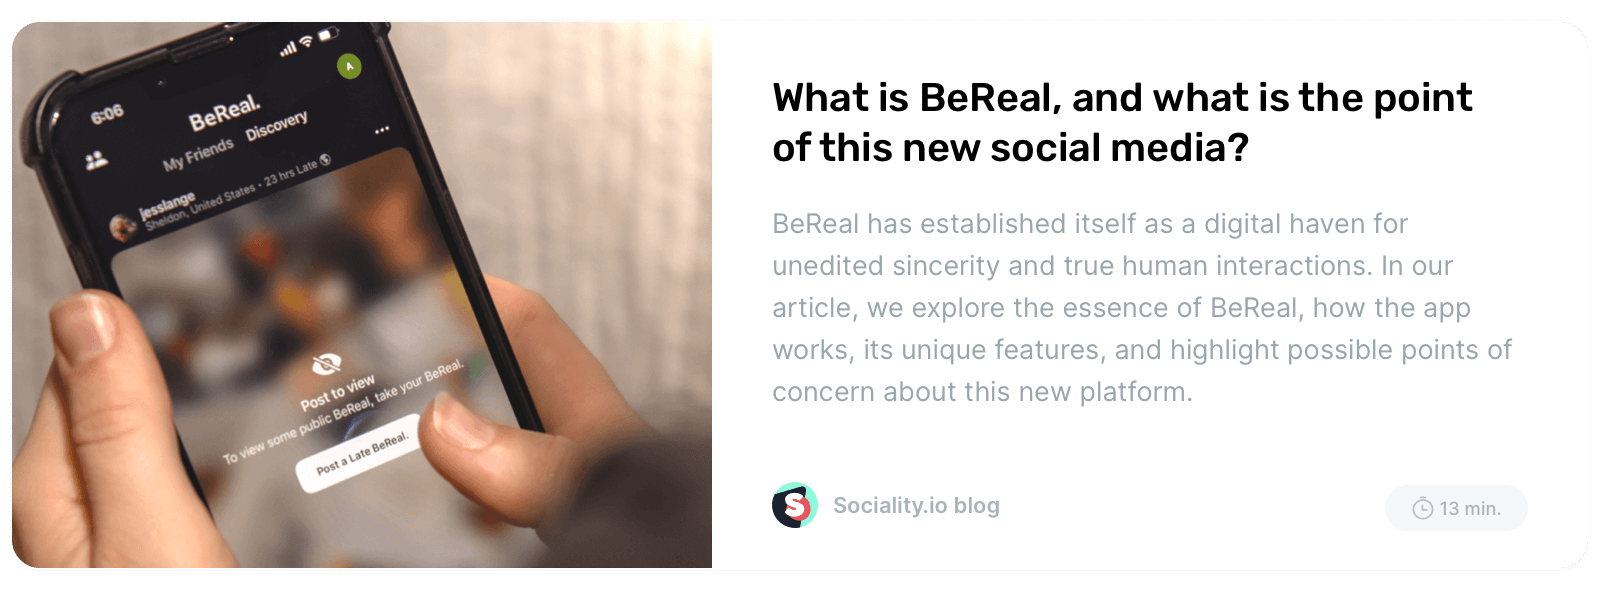 Sociality.io blog - What is BeReal